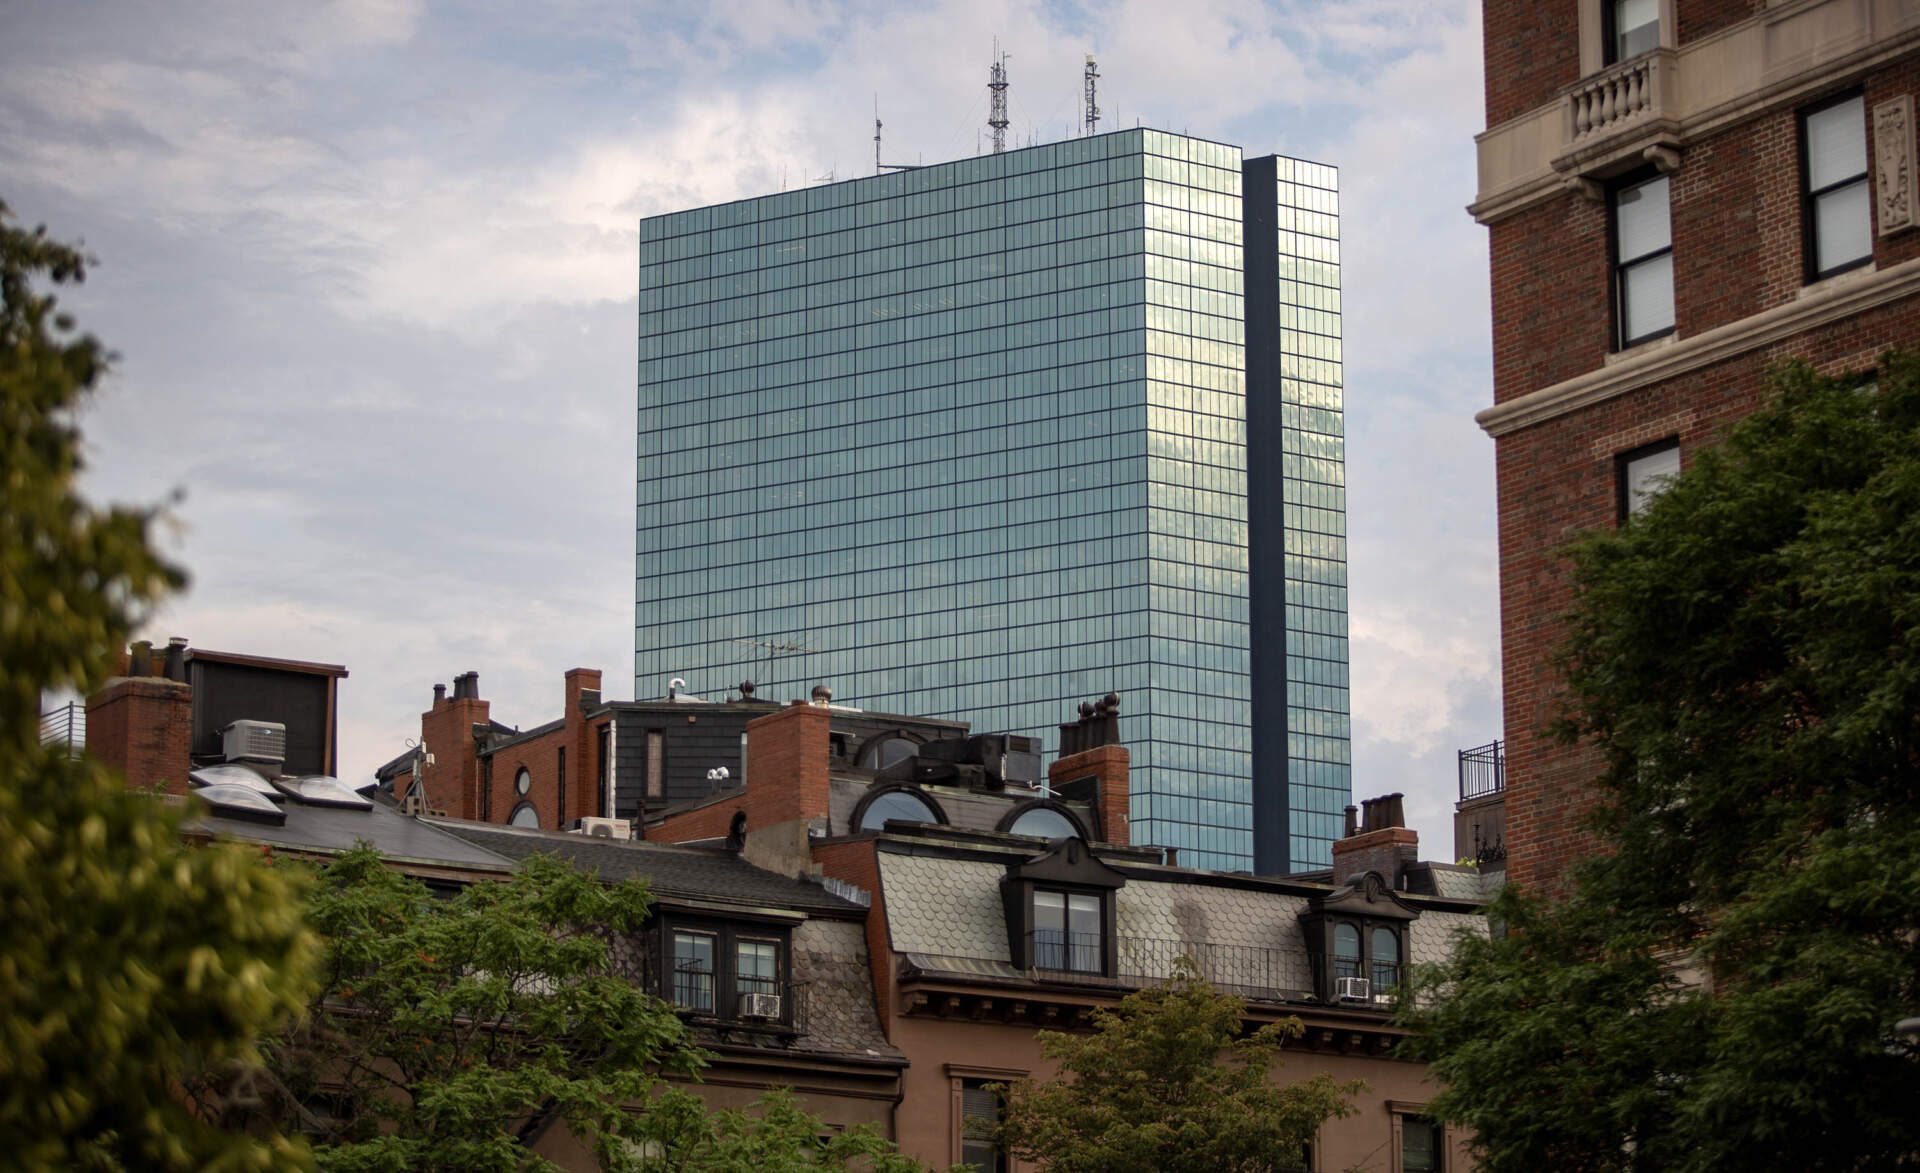 Pictured are Back Bay brownstones and 200 Clarendon Street, previously the John Hancock Tower. (Robin Lubbock/WBUR)